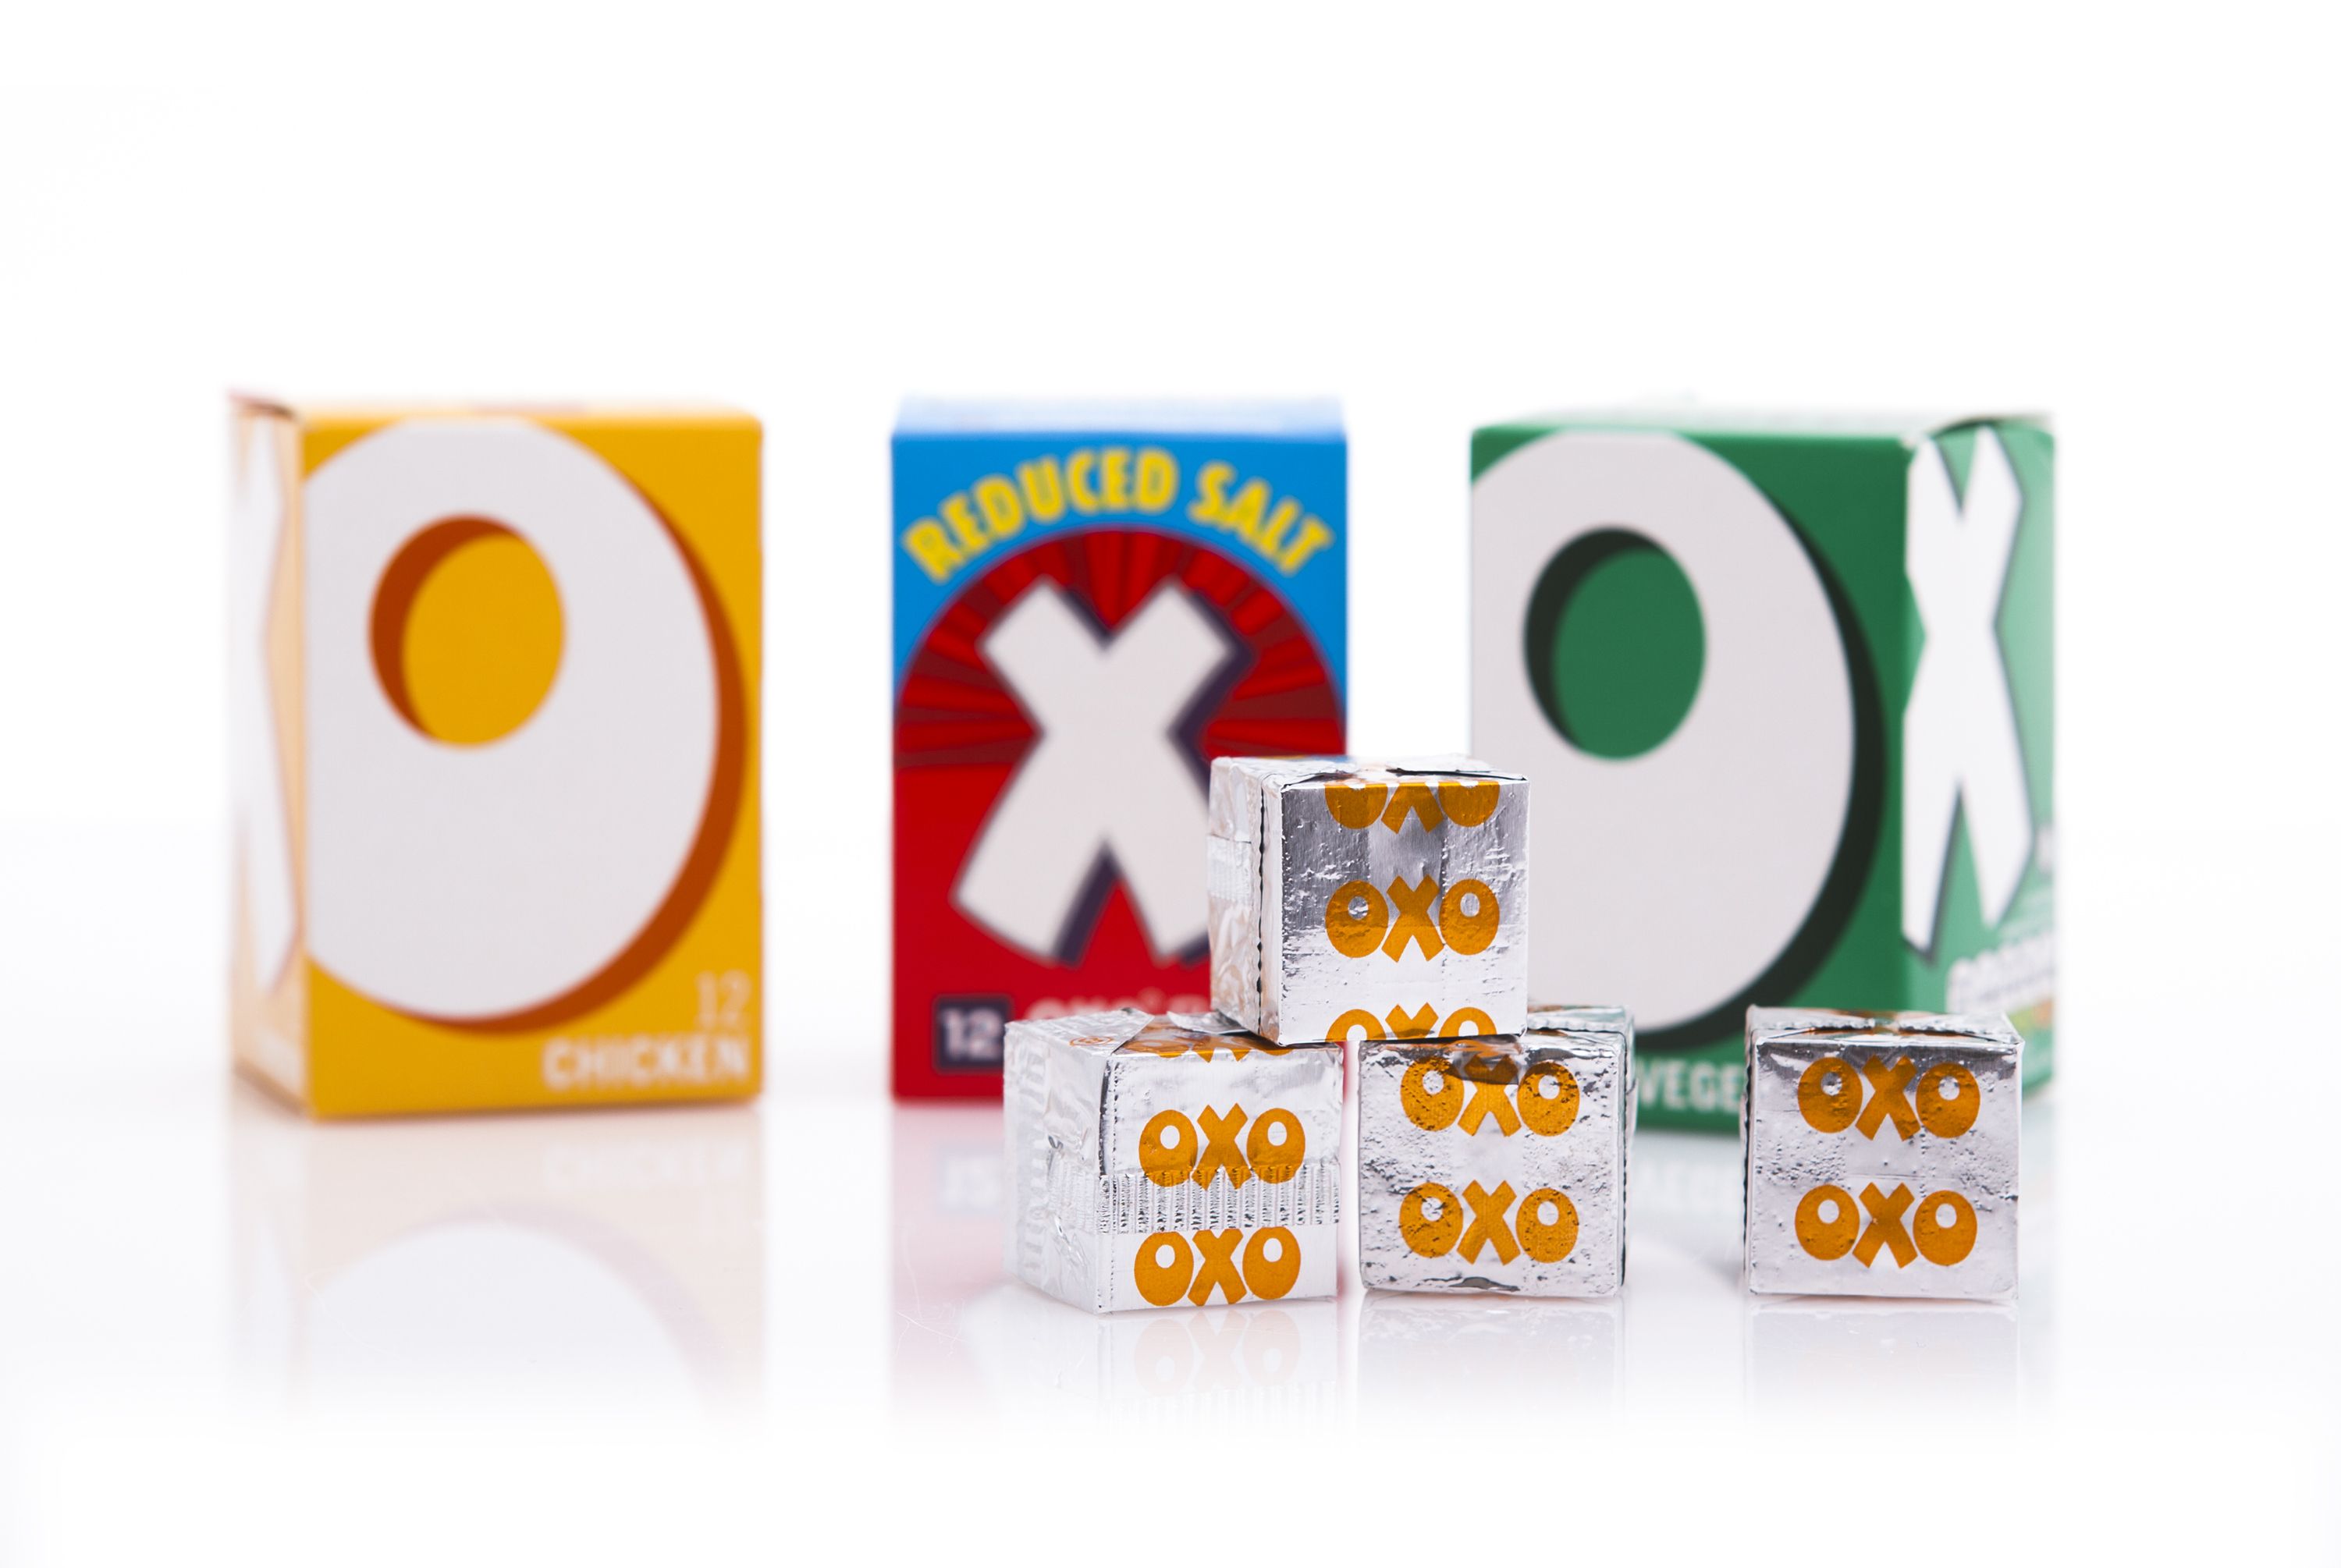 Nifty Oxo Cube Hack Makes Cooking With Them A Lot Easier How To Open Oxo Packet